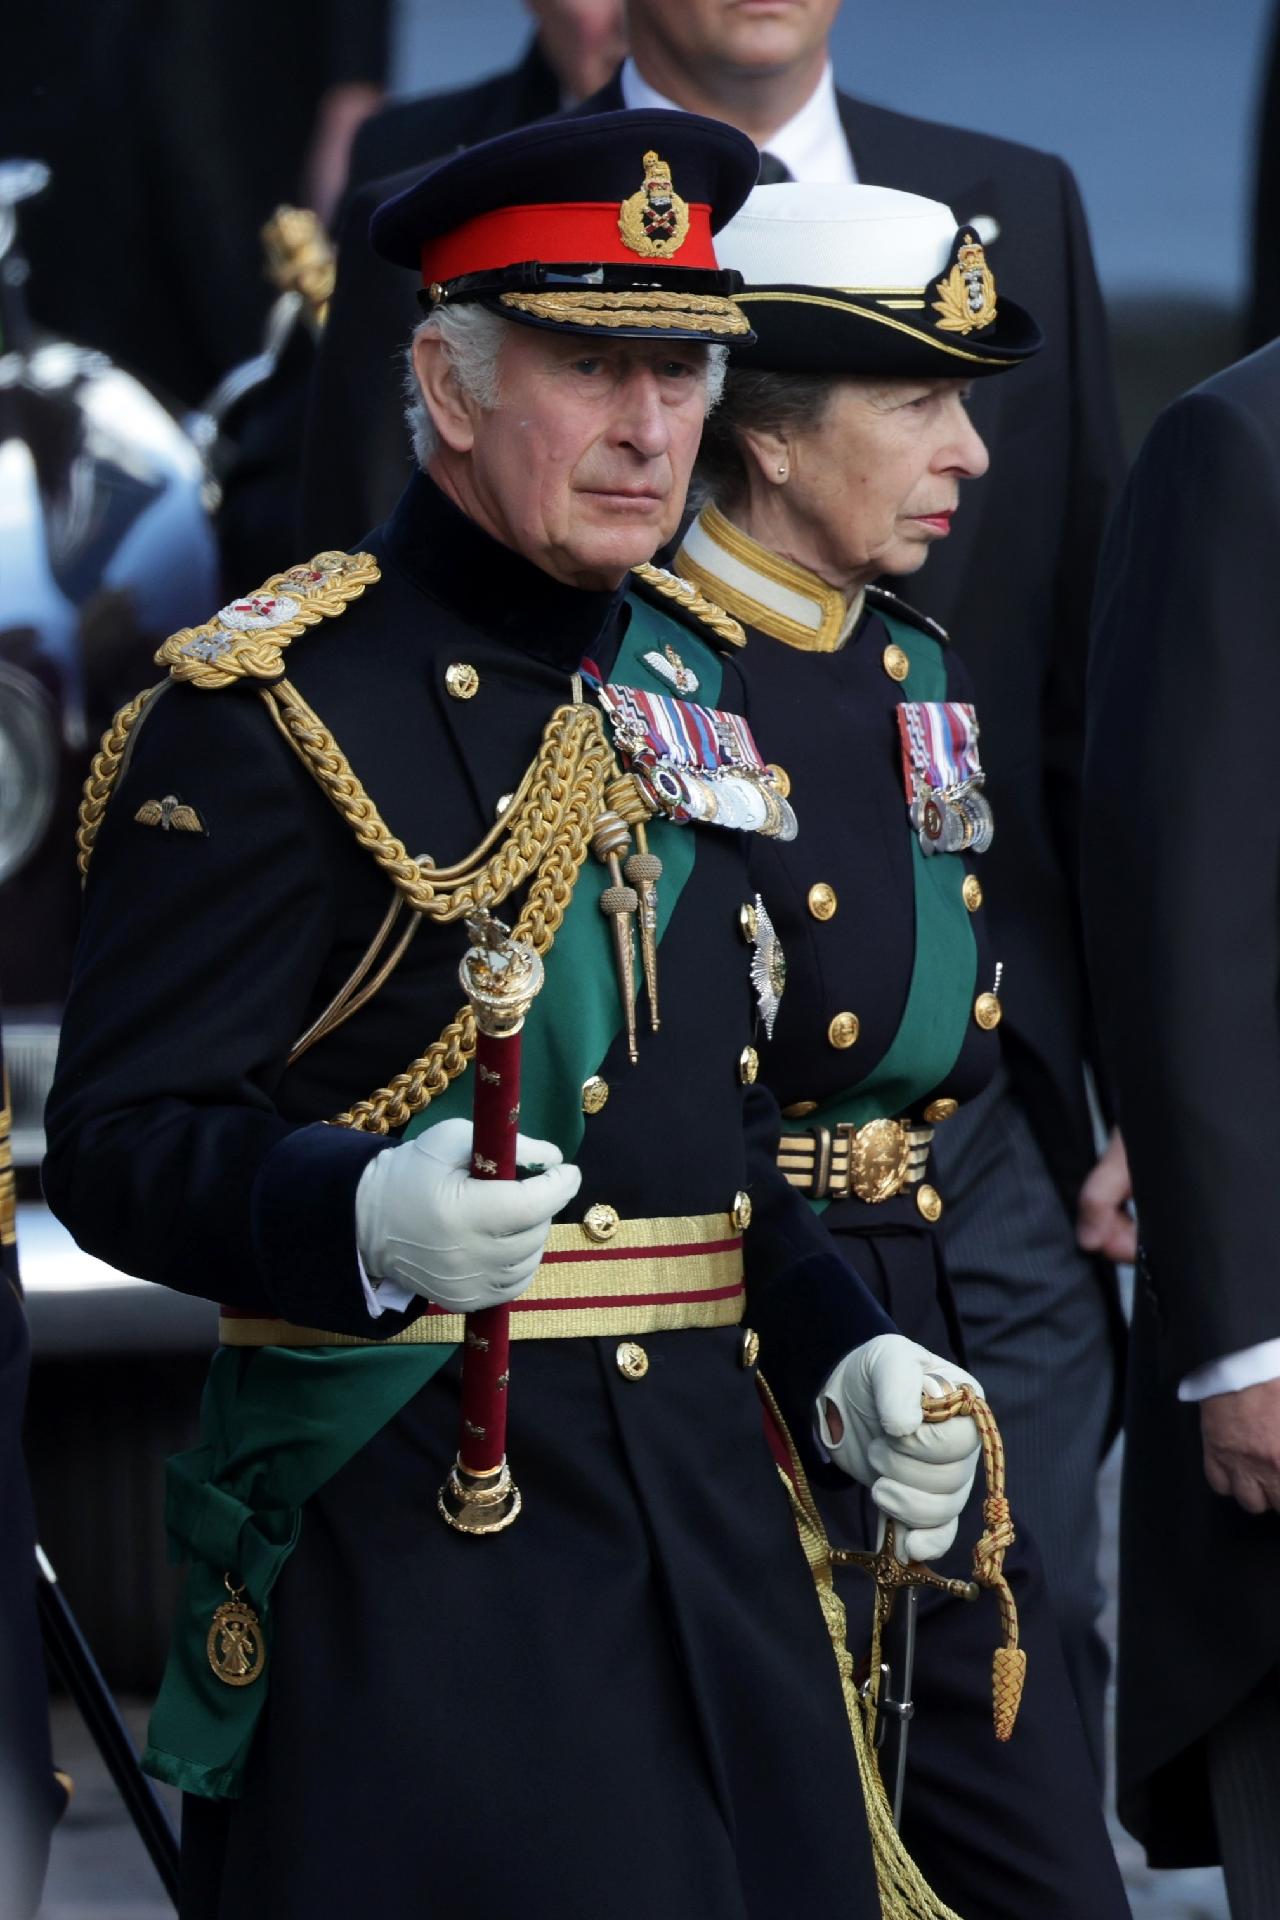 King Charles III accompanies Queen Elizabeth's body in procession - Chris Jackson/Getty Images